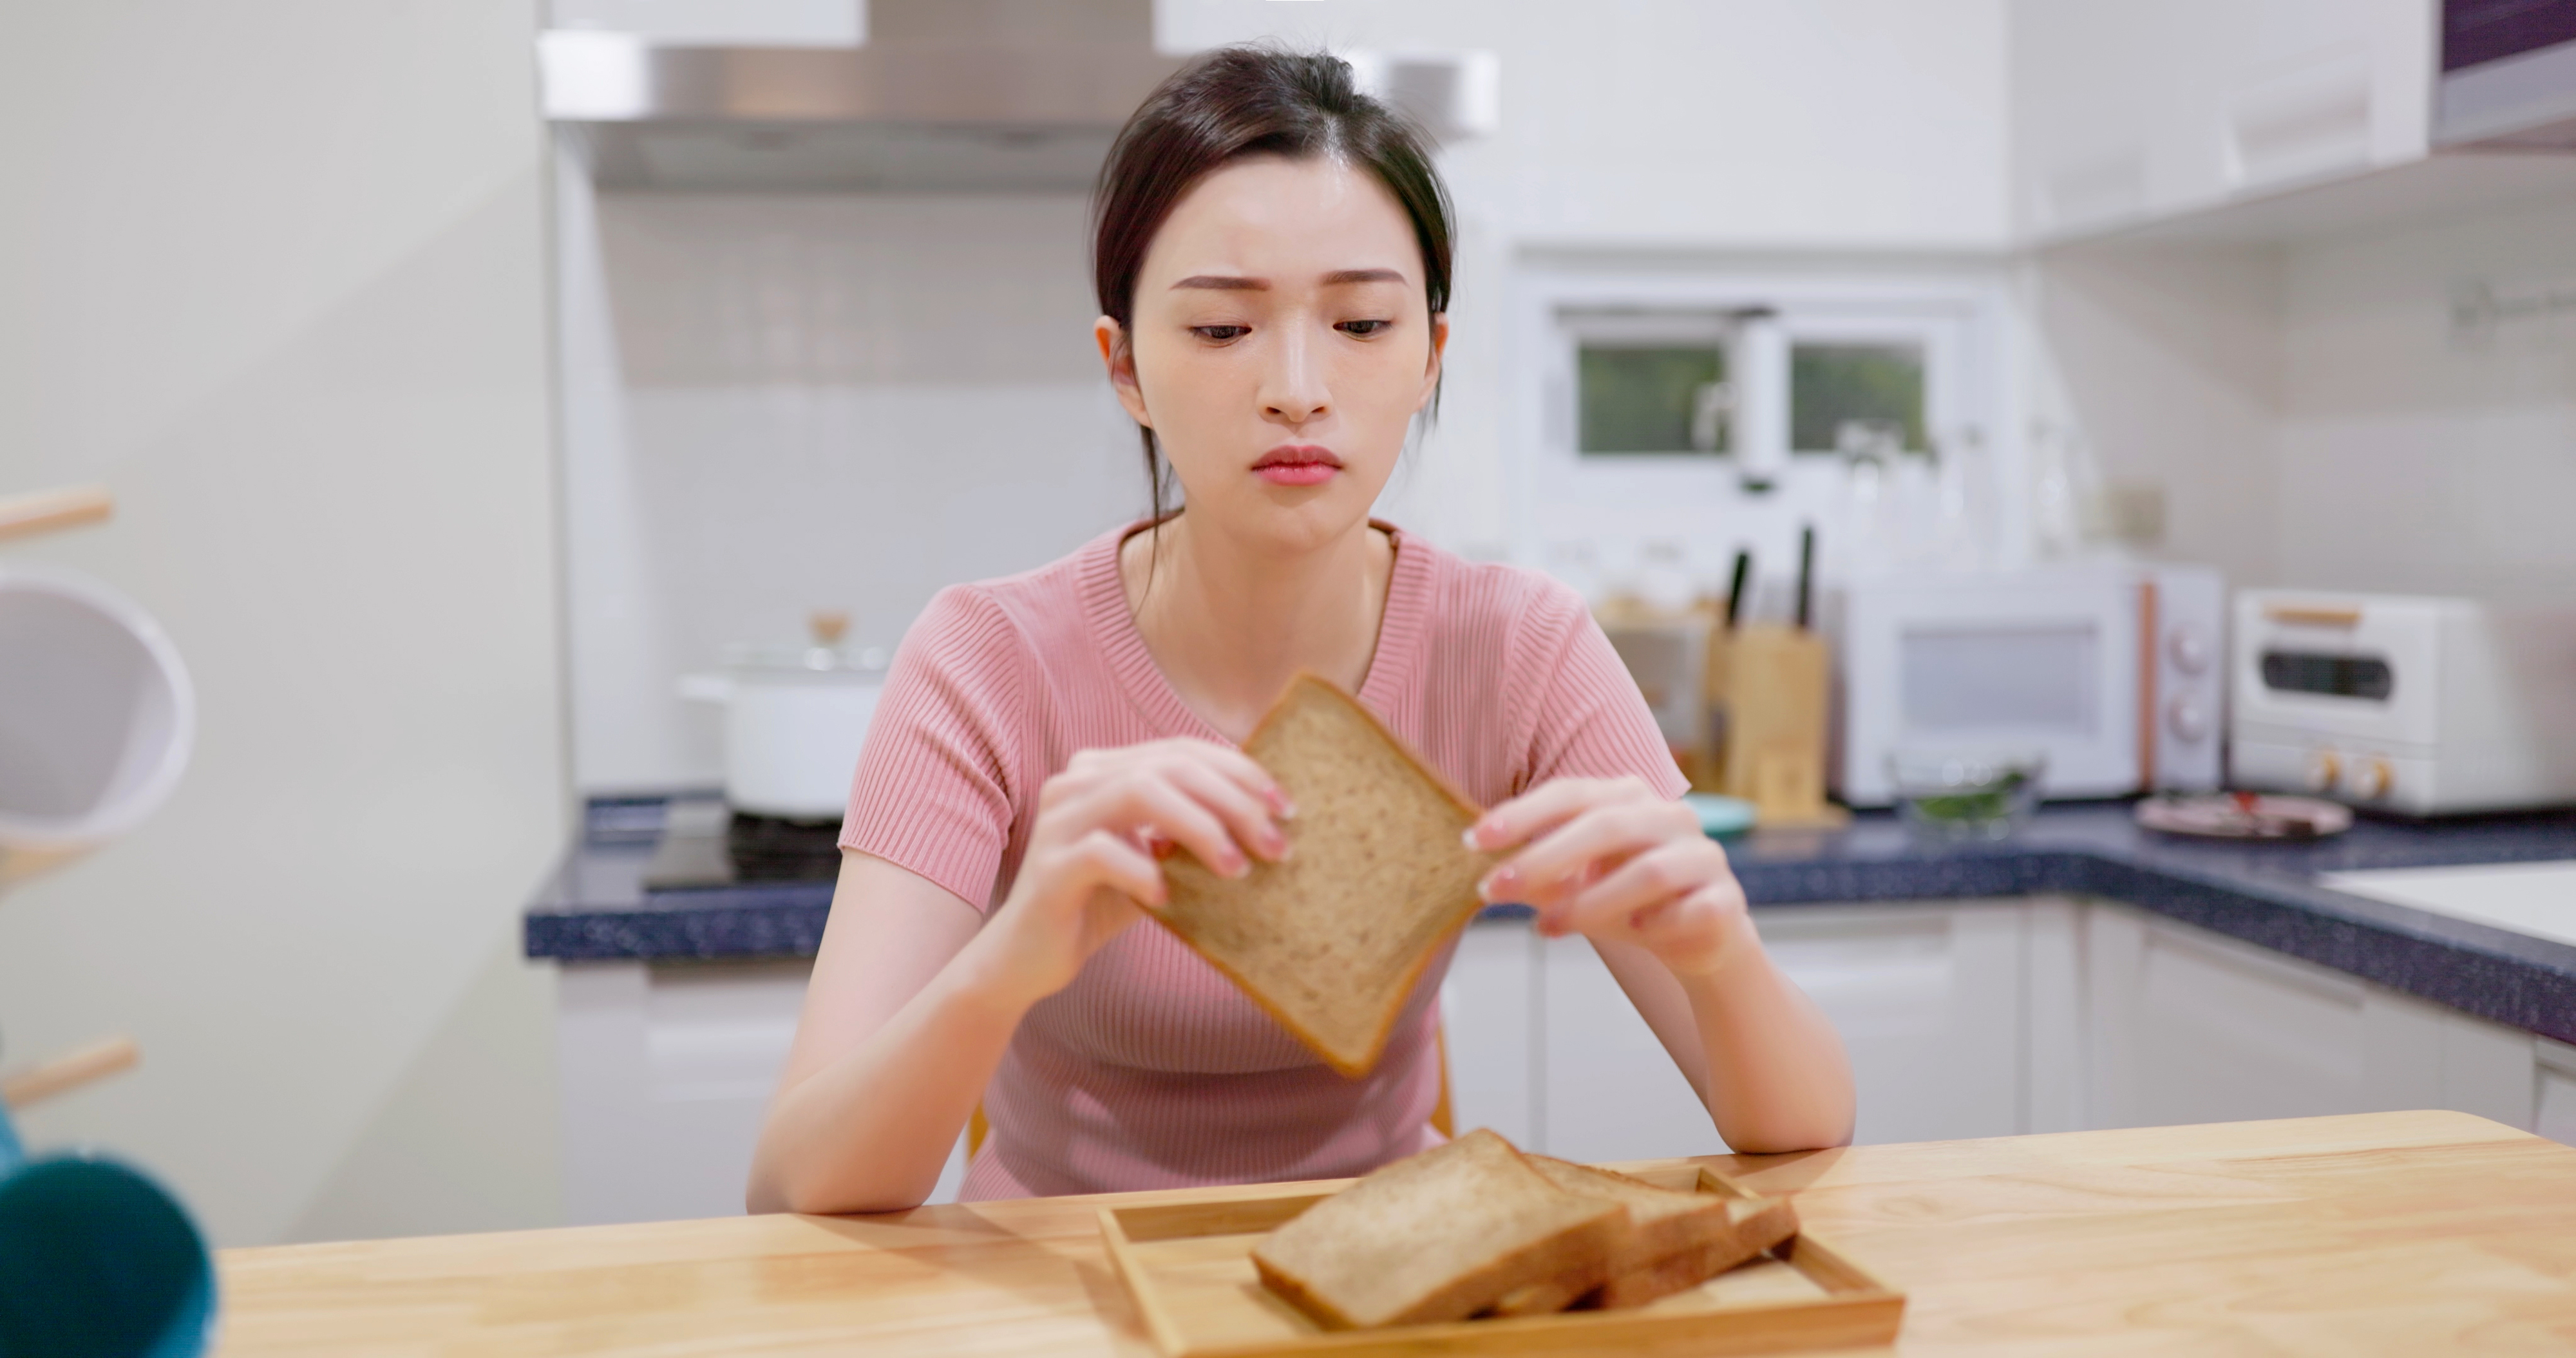 Woman in a kitchen looking thoughtfully at a slice of bread, with more slices on a plate in front of her